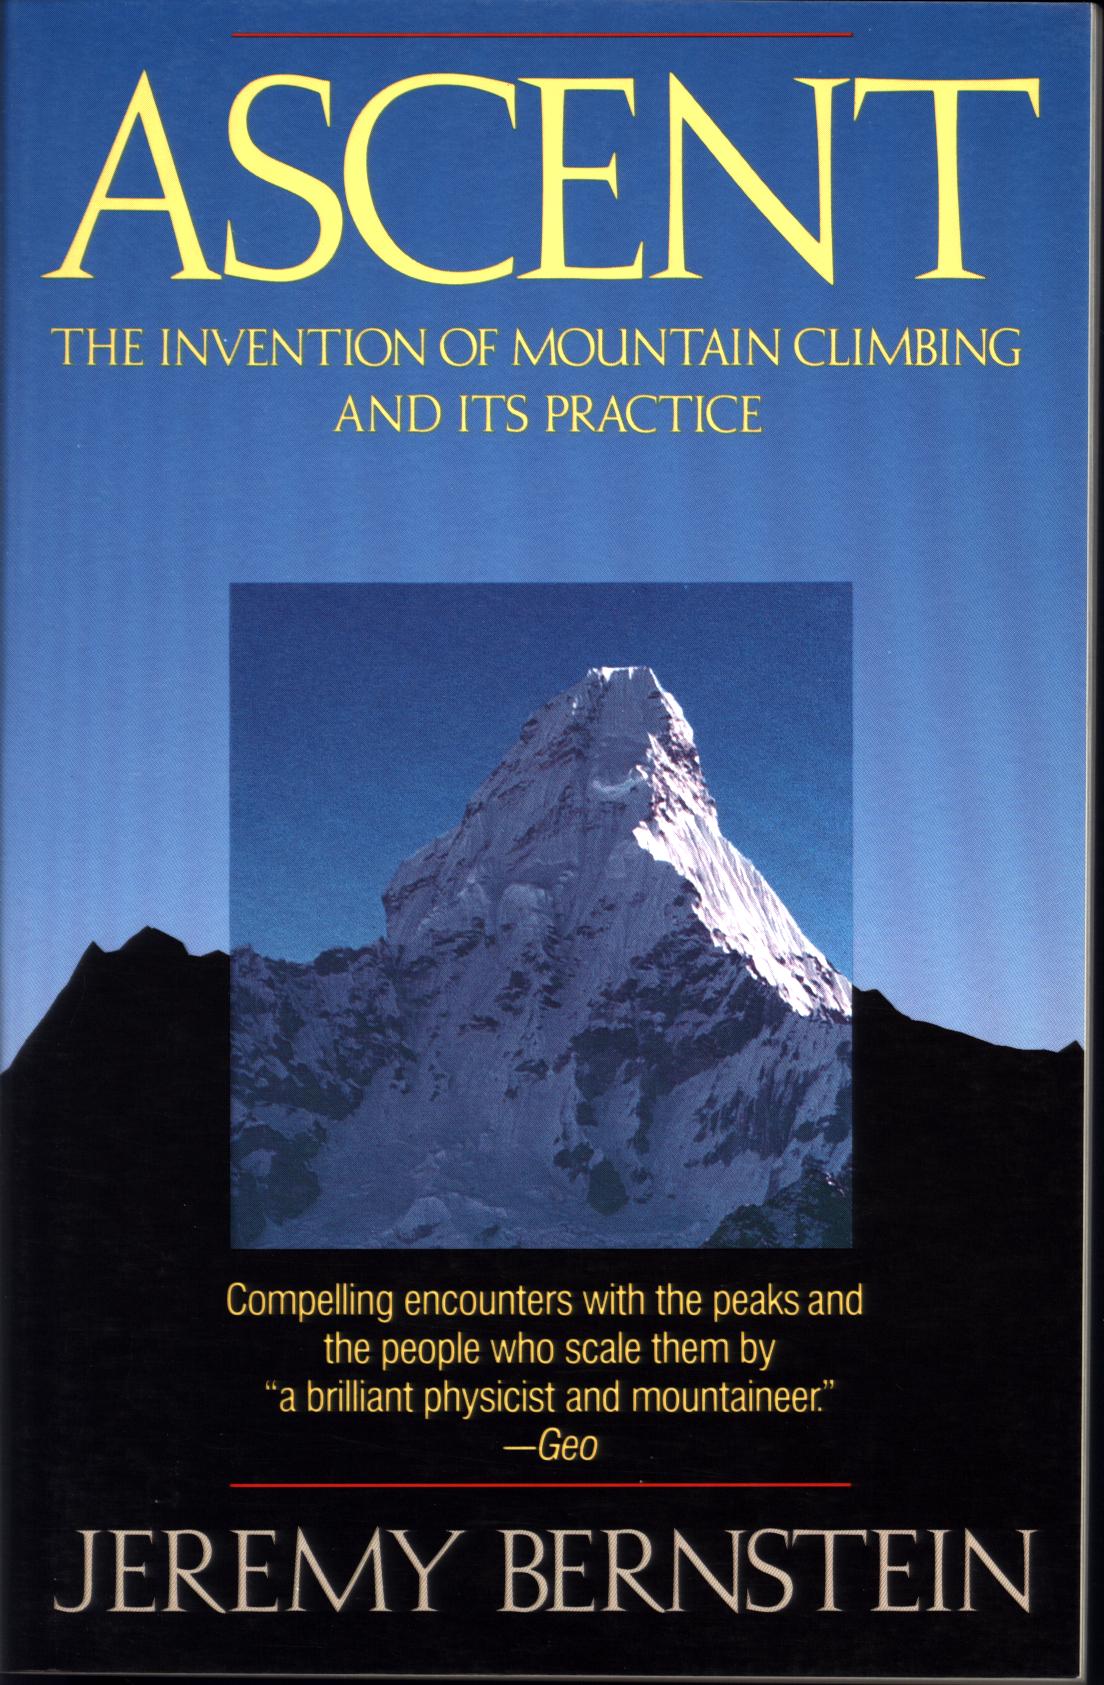 ASCENT: the invention of mountain climbing and its practice.